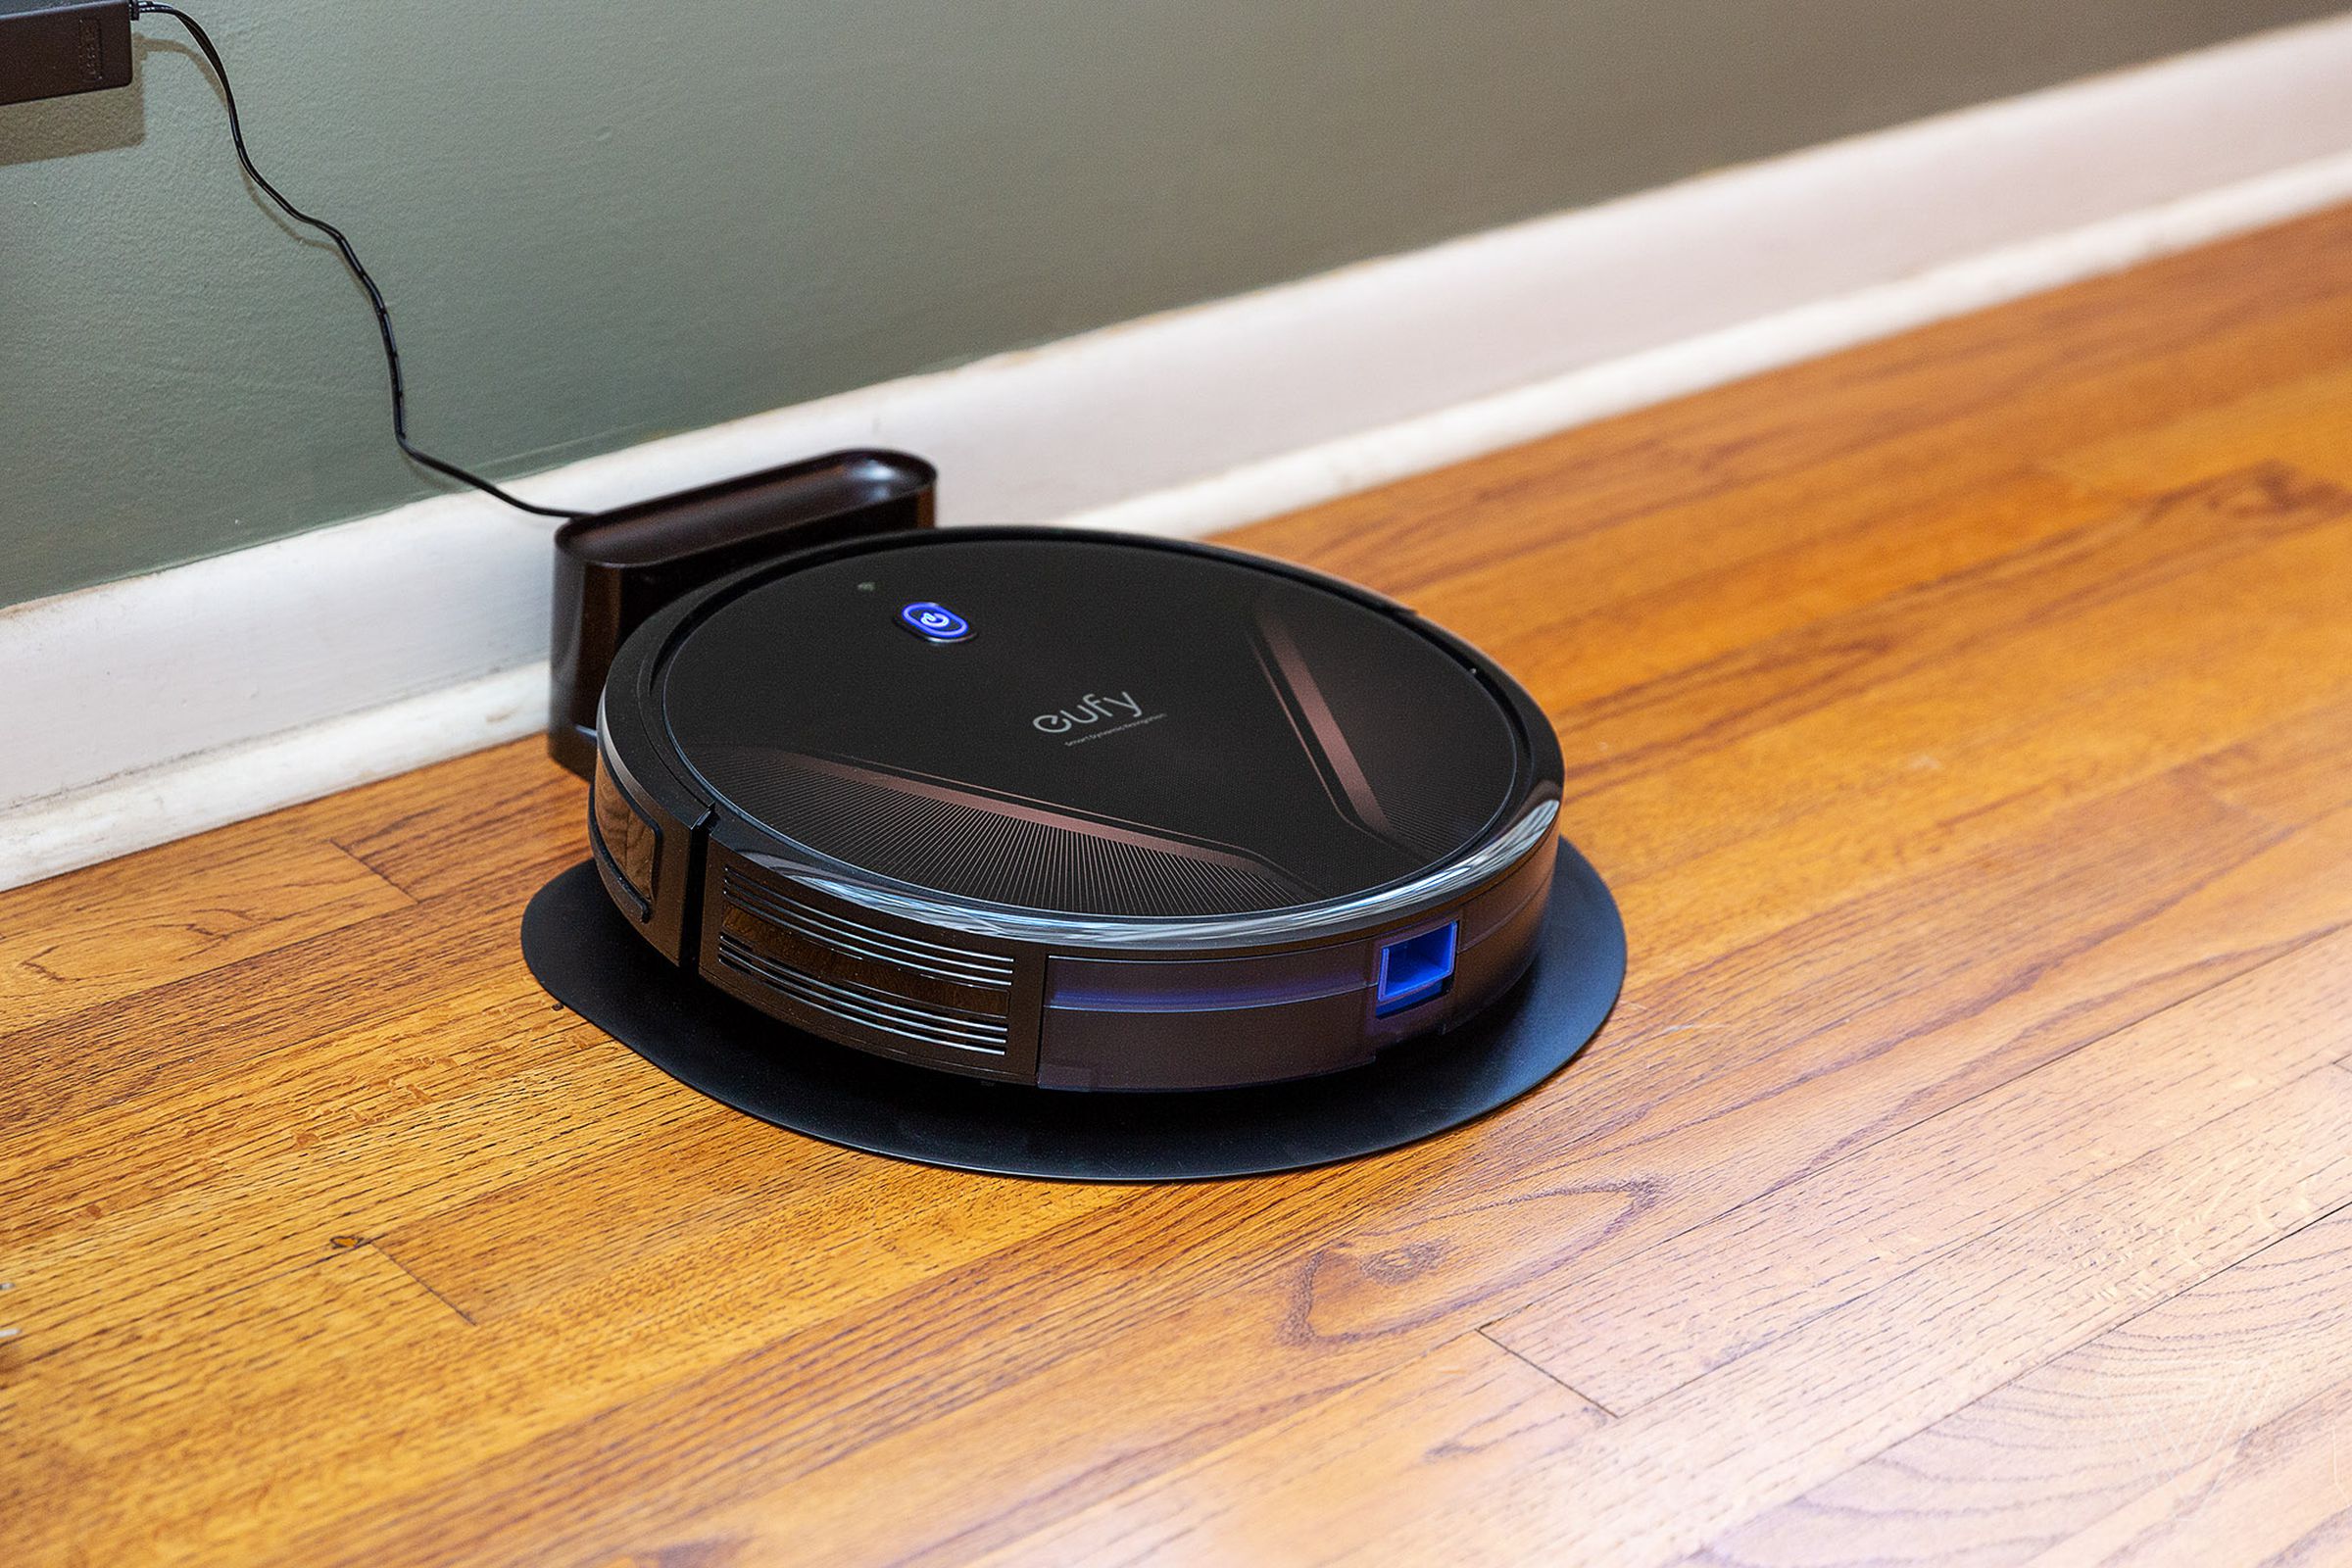 The Eufy G20 Hybrid is a small, svelte robot vac that’s perfect for tackling smaller jobs with less fuss.